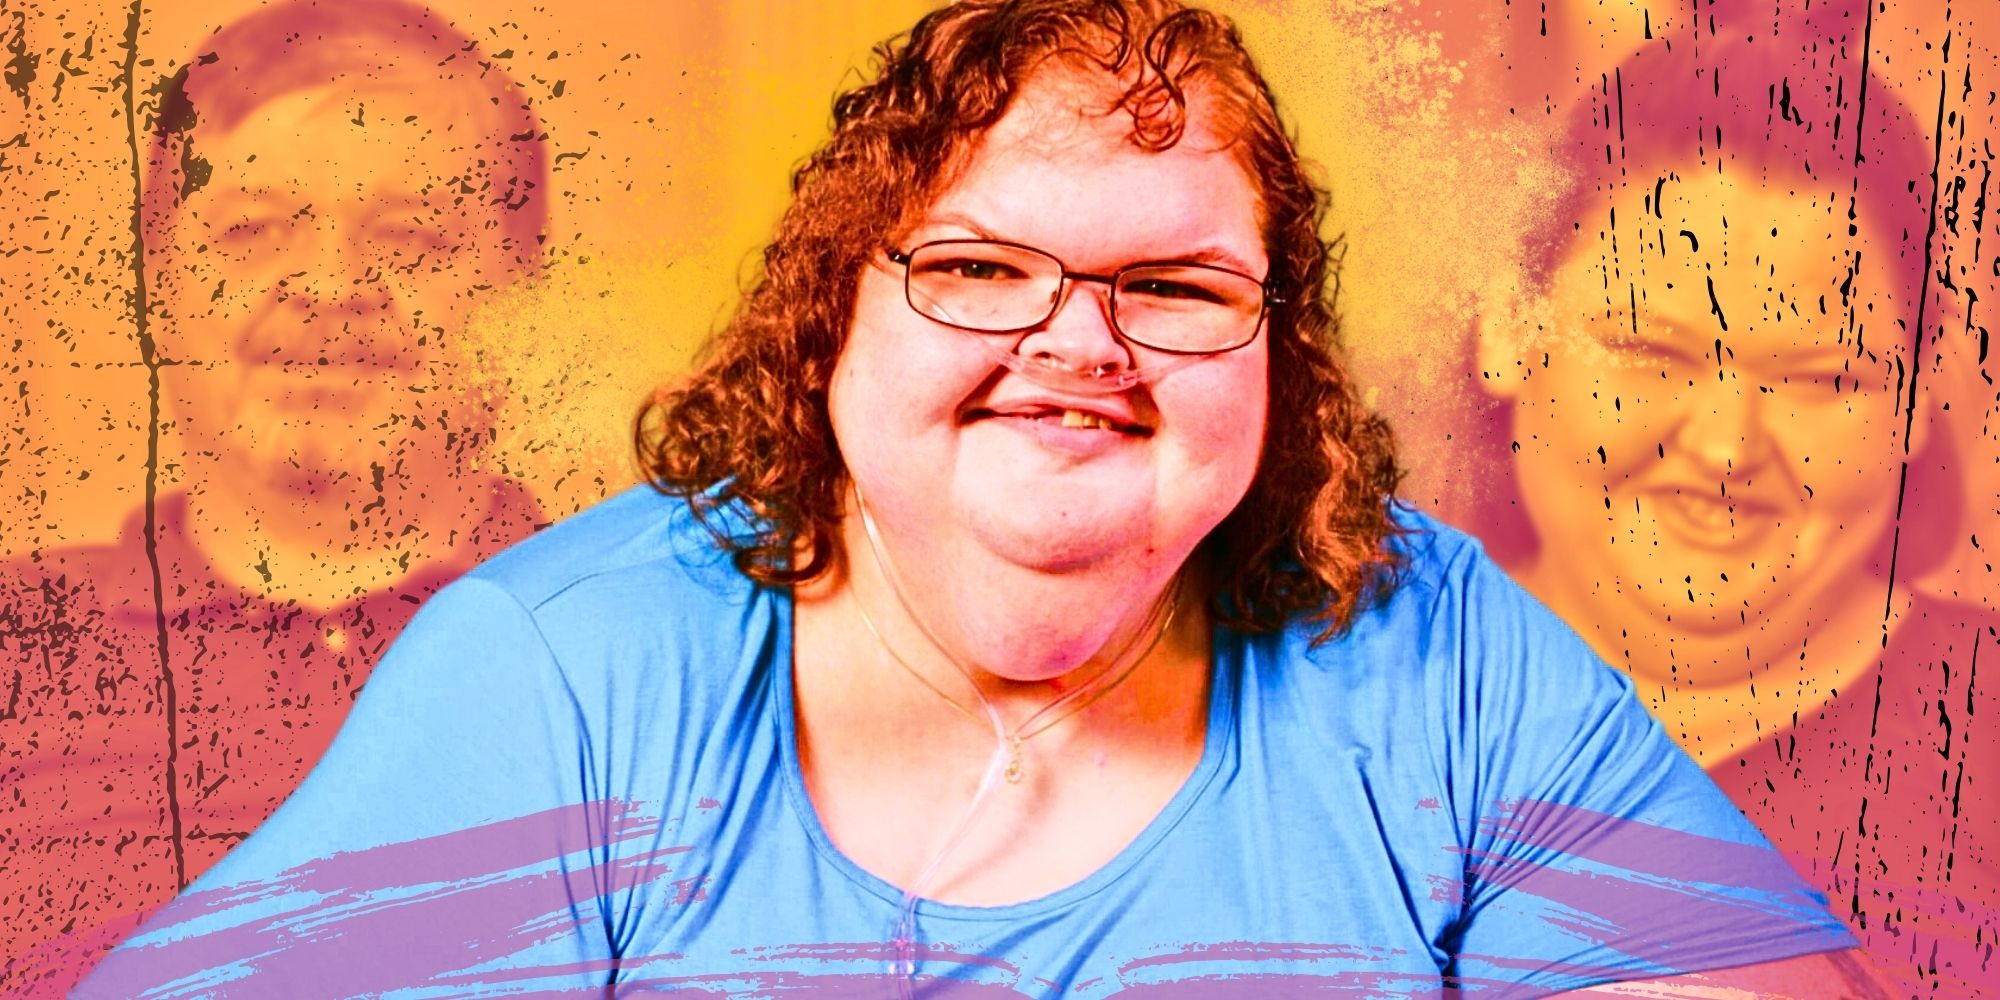 1000-Lb Sisters_ Tammy's Weight Loss Milestone, Stink Candles & Garbage Bags (8 Of Season 5's Highlights Ranked)